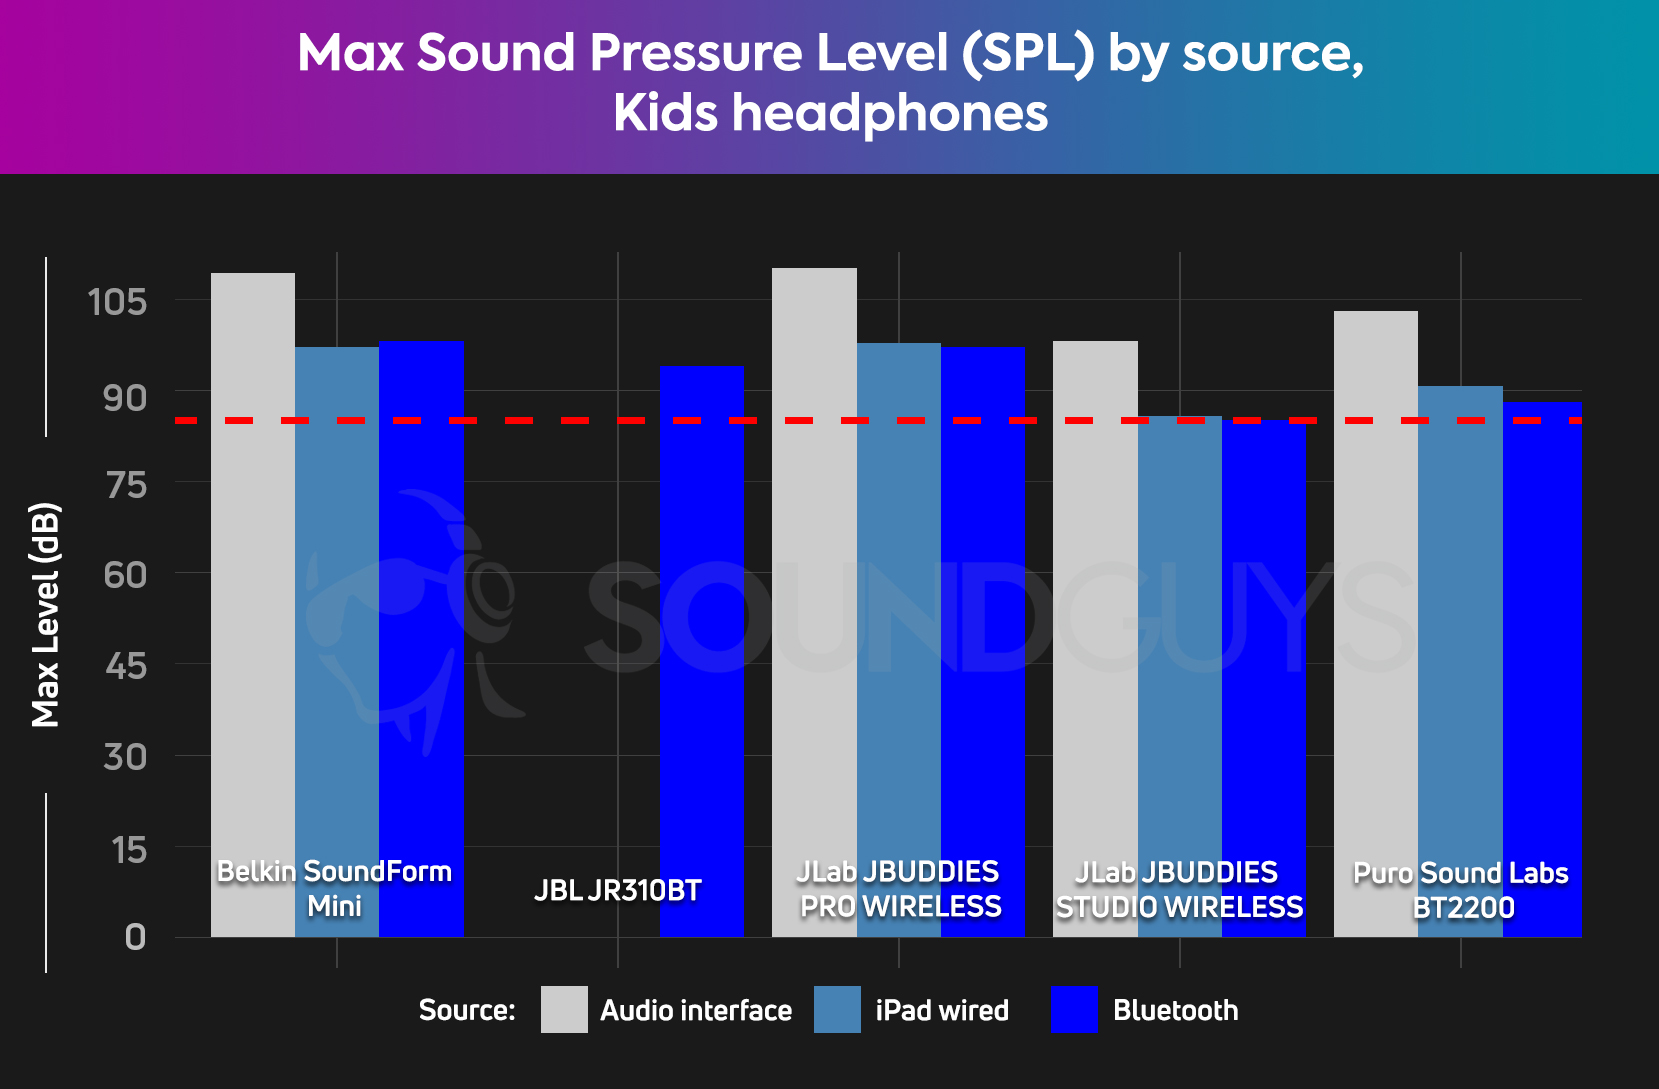 A bar plot showing the maximum output in sound pressure level for five kids headphones.